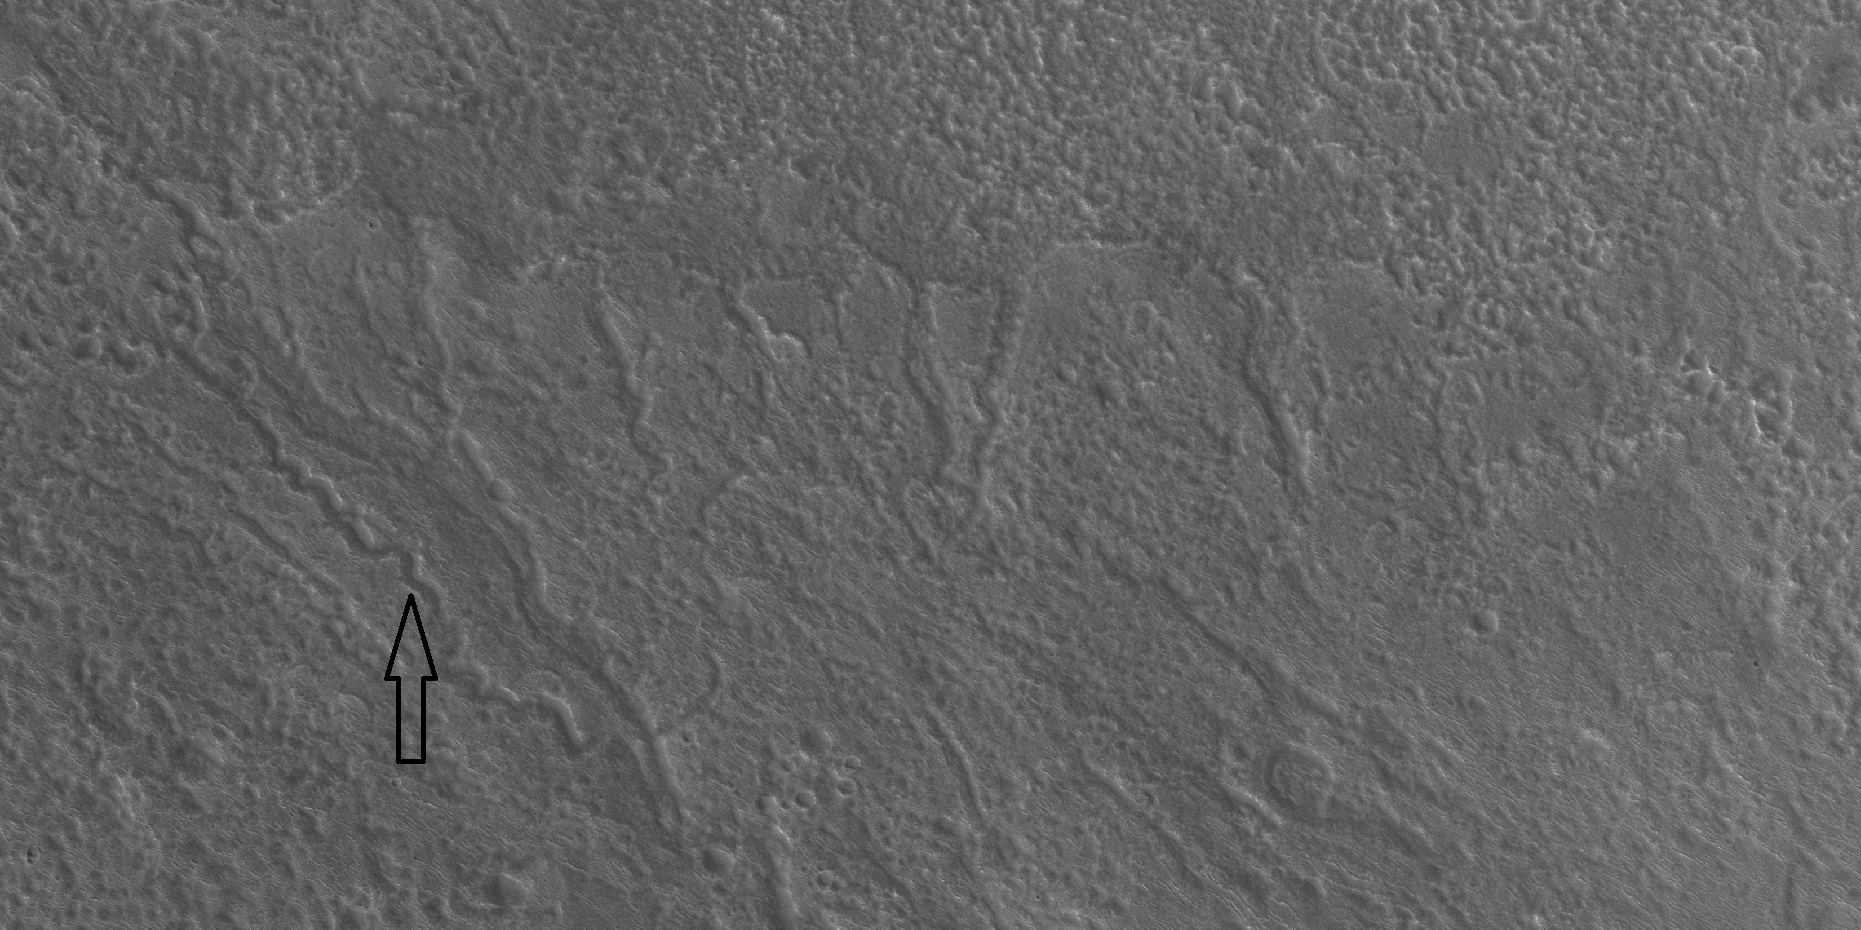 Channels,as seen by HiRISE under the HiWish program